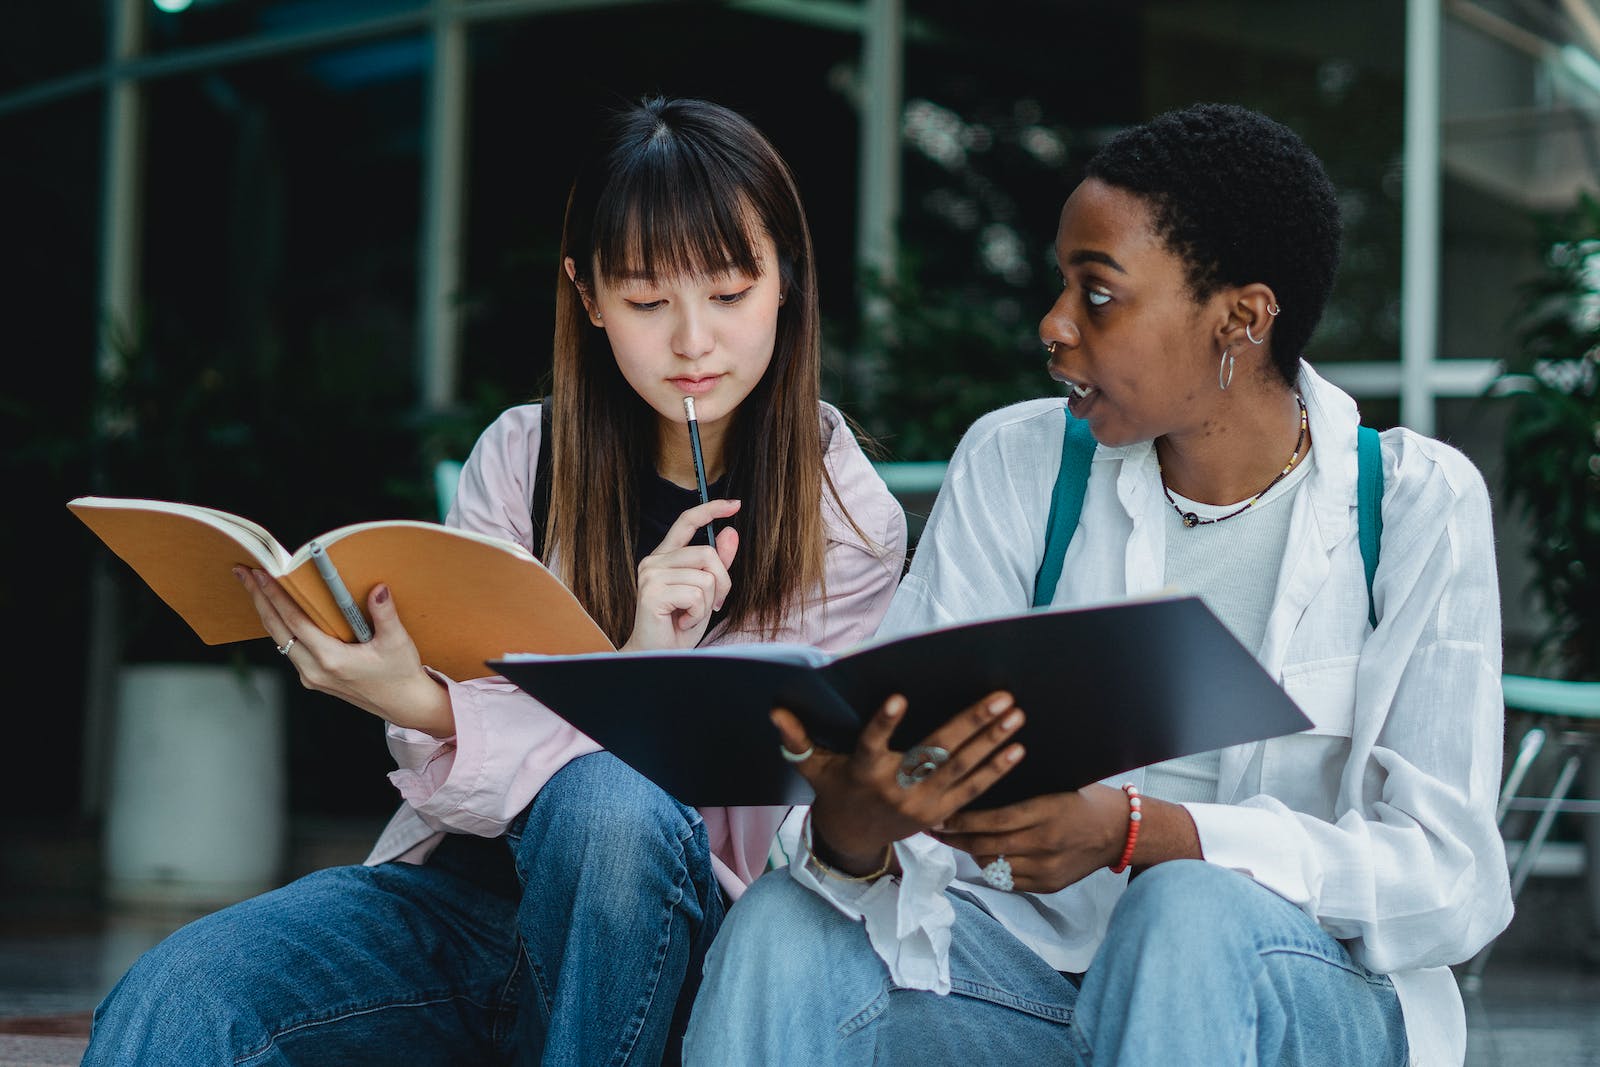 Young black woman talking to Asian girlfriend with copybook while studying together in town